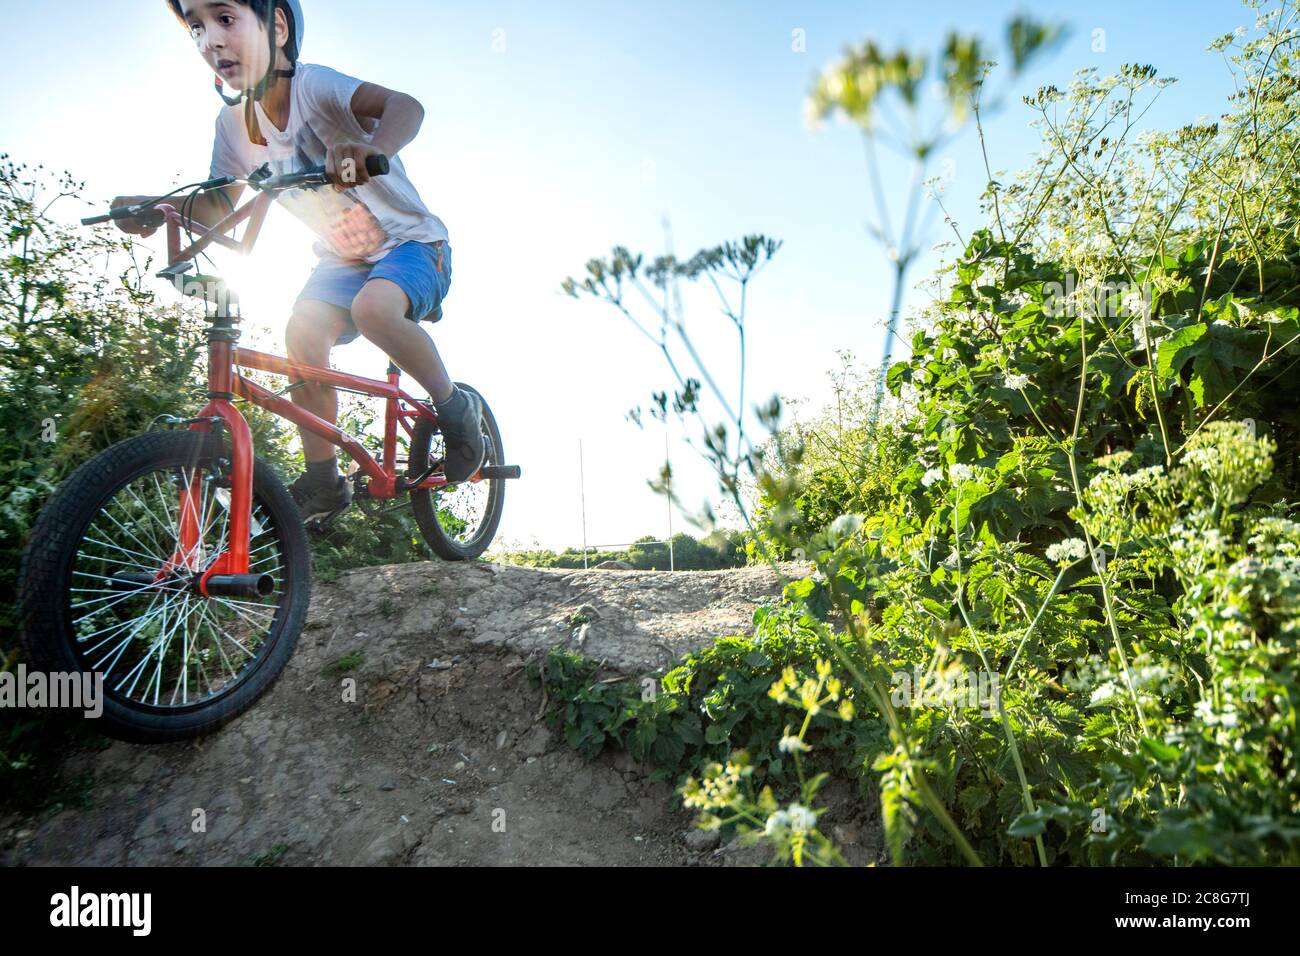 Boy riding down slope on a red BMX bicycle. Stock Photo